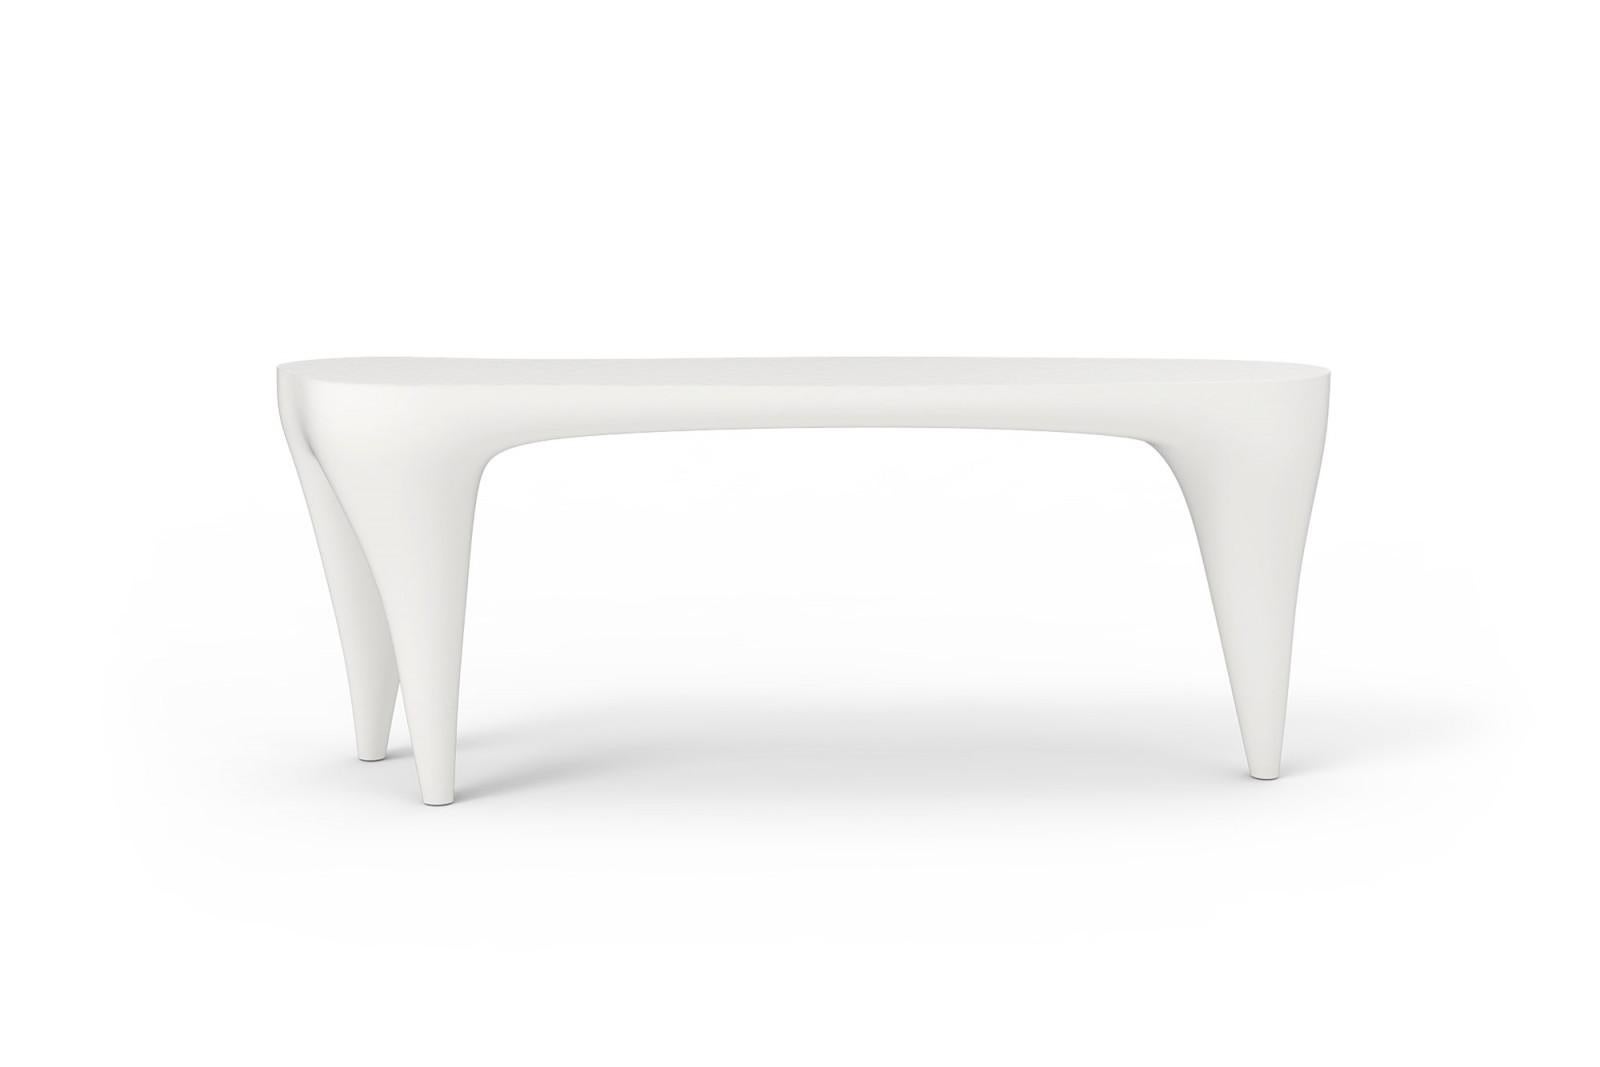 Contemporary outdoor/indoor console table built with resin reinforced fiberglass. This highly resistant material is suitable for all weather conditions with extreme temperatures. The table is offered in matte white lacquer finish.
This piece is